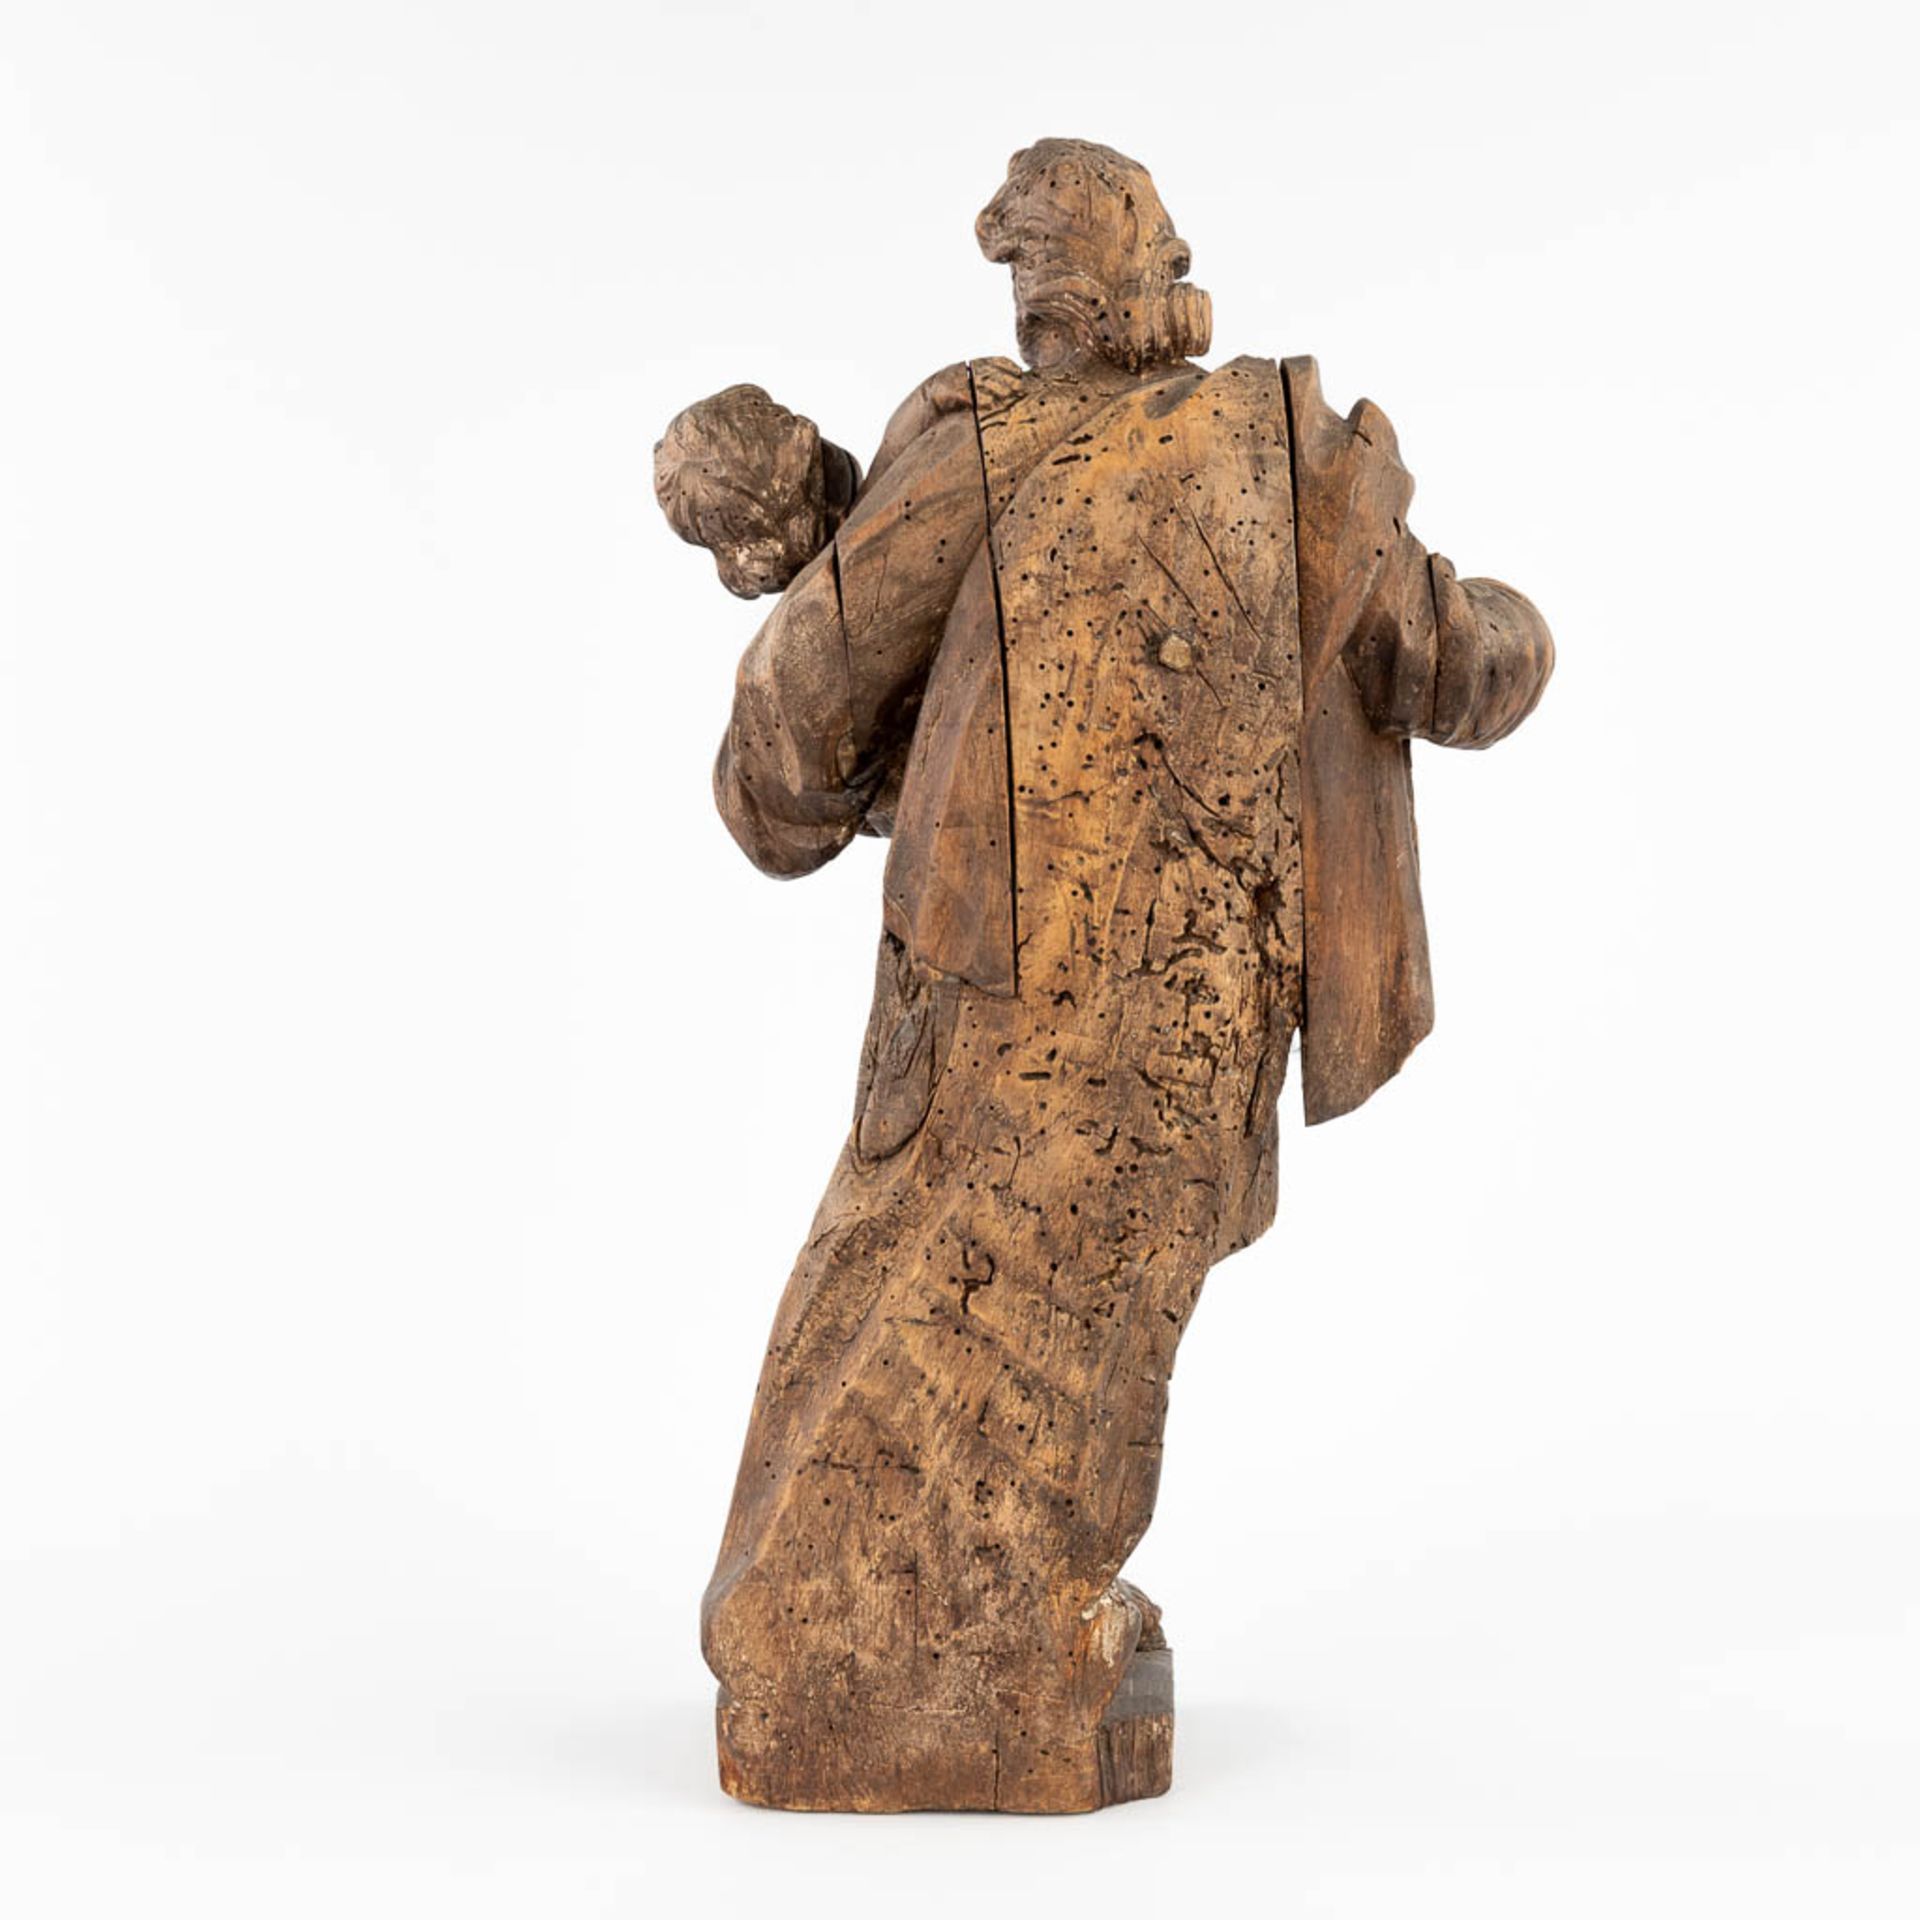 An antique wood-sculpture 'Joseph and baby Jesus', 17th/18th C. (L:14 x W:27 x H:48 cm) - Image 5 of 15